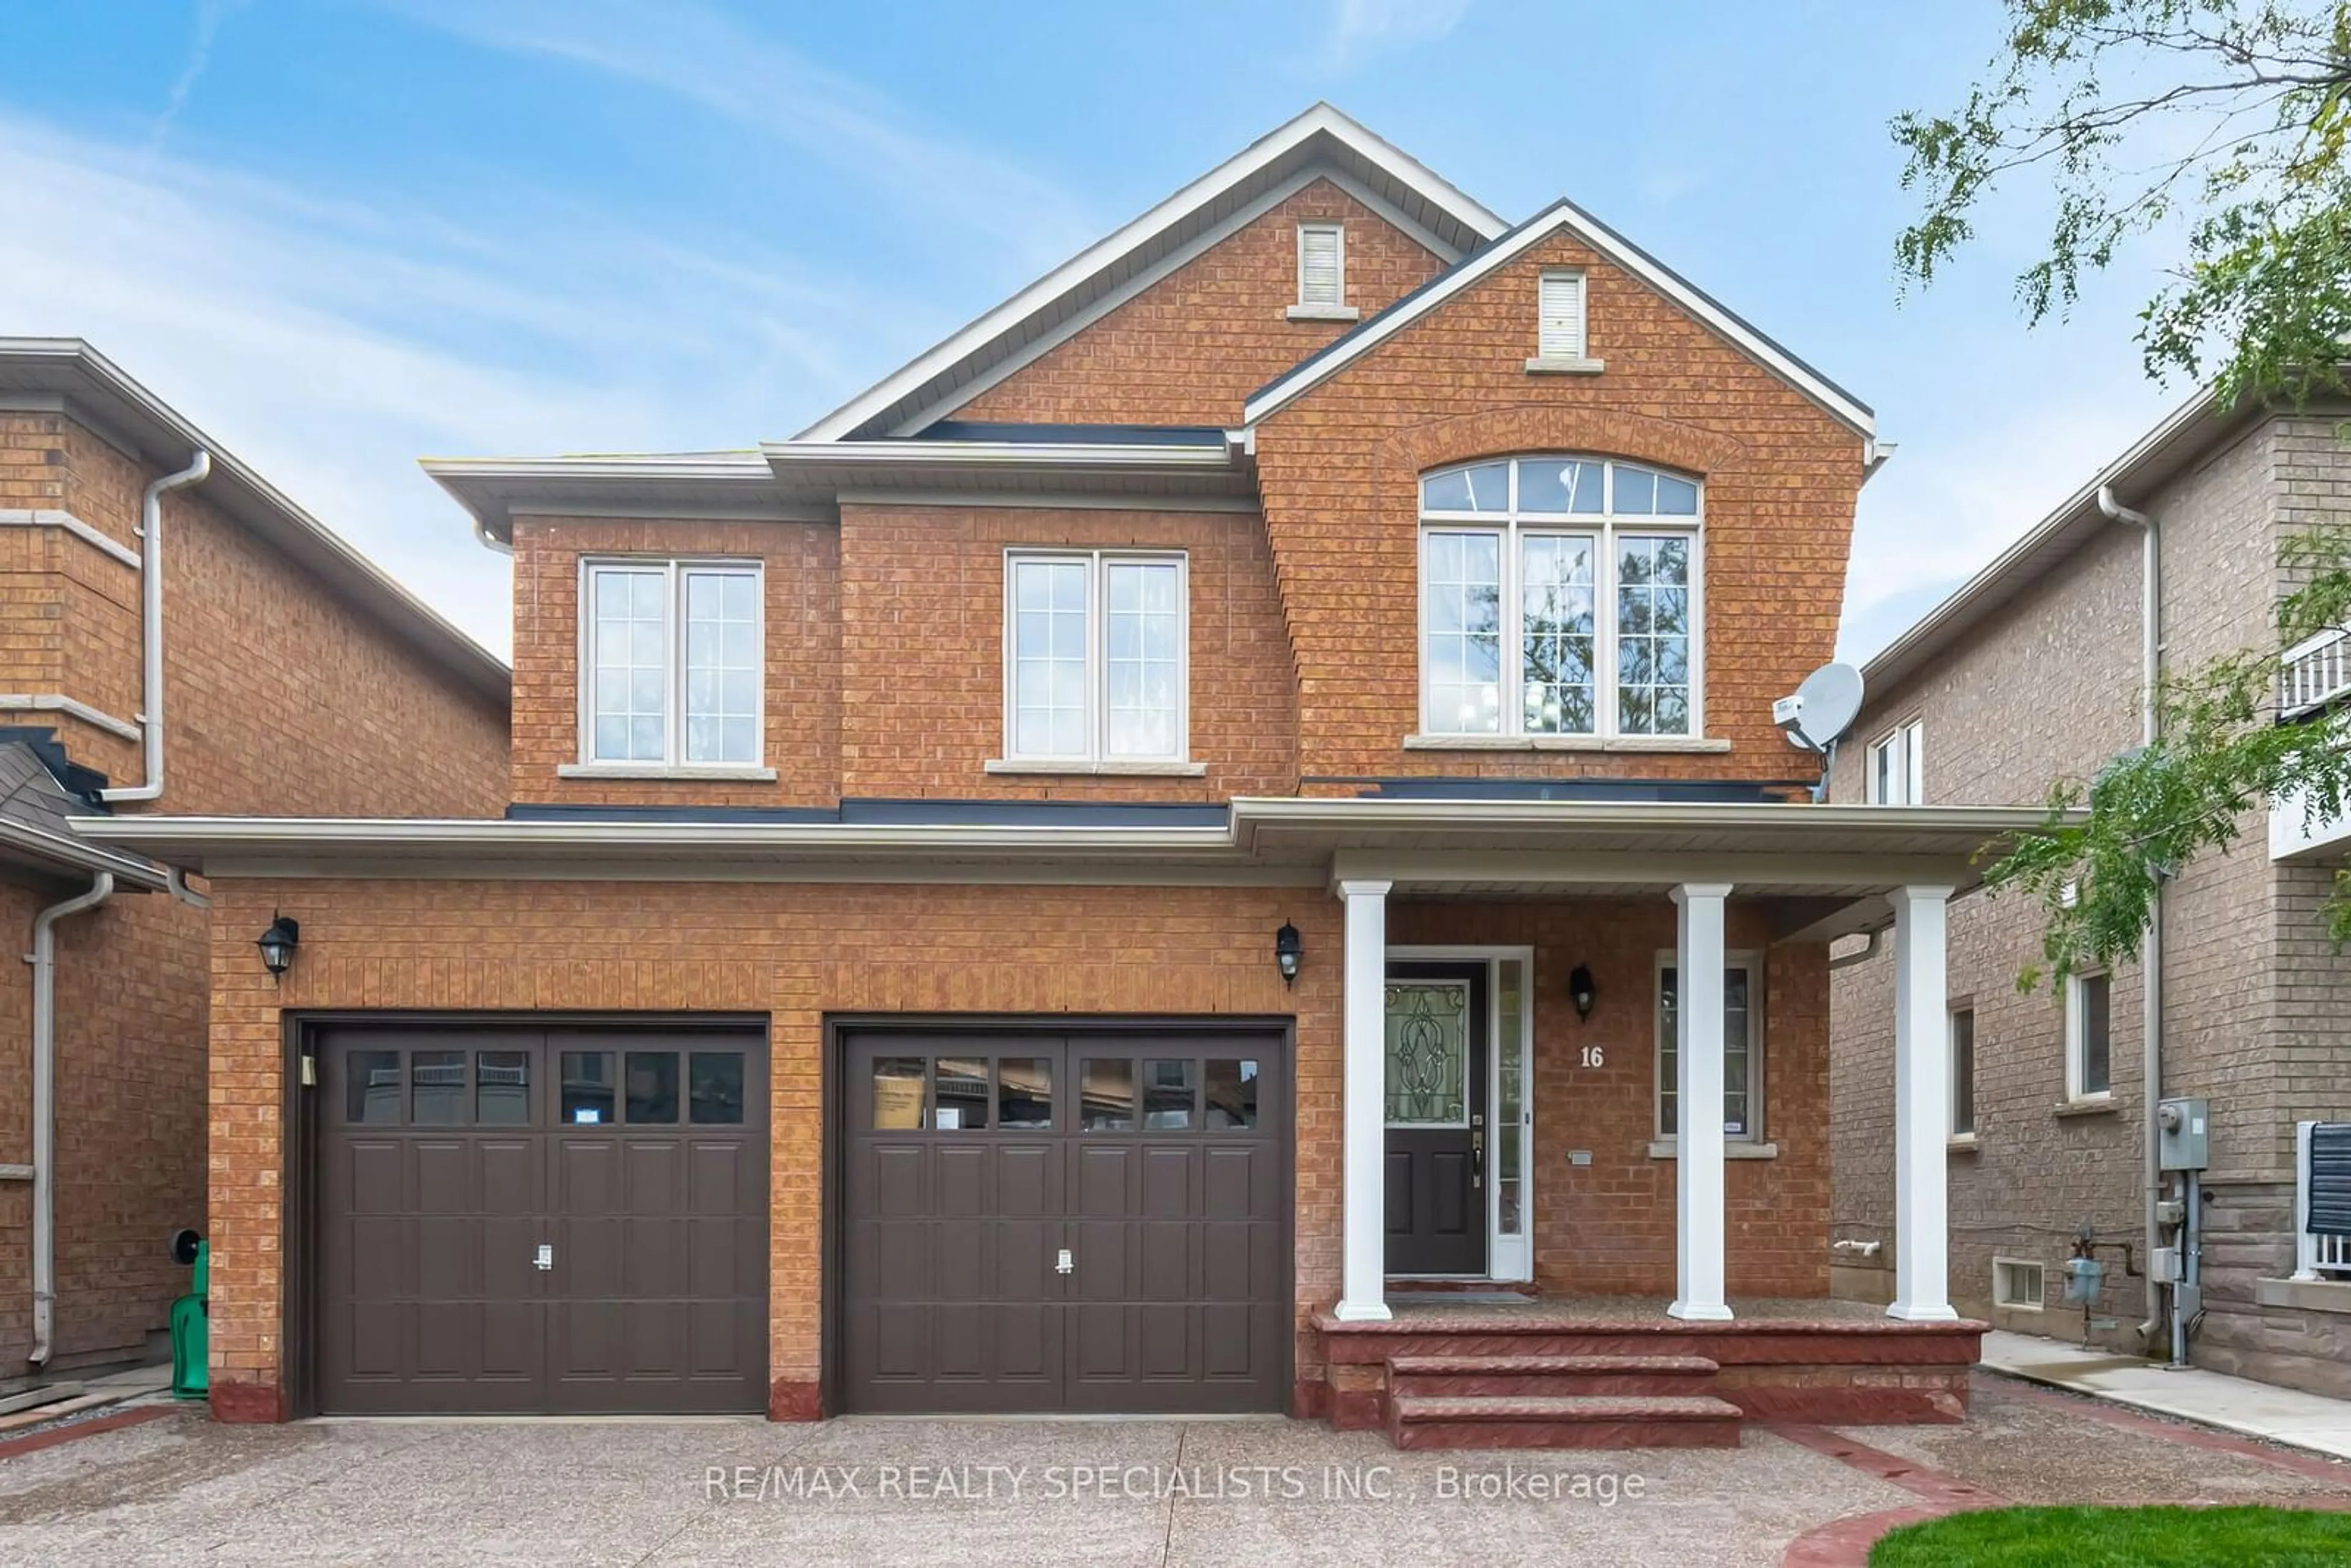 Home with brick exterior material for 16 Mountland Rd, Brampton Ontario L6P 1Z9